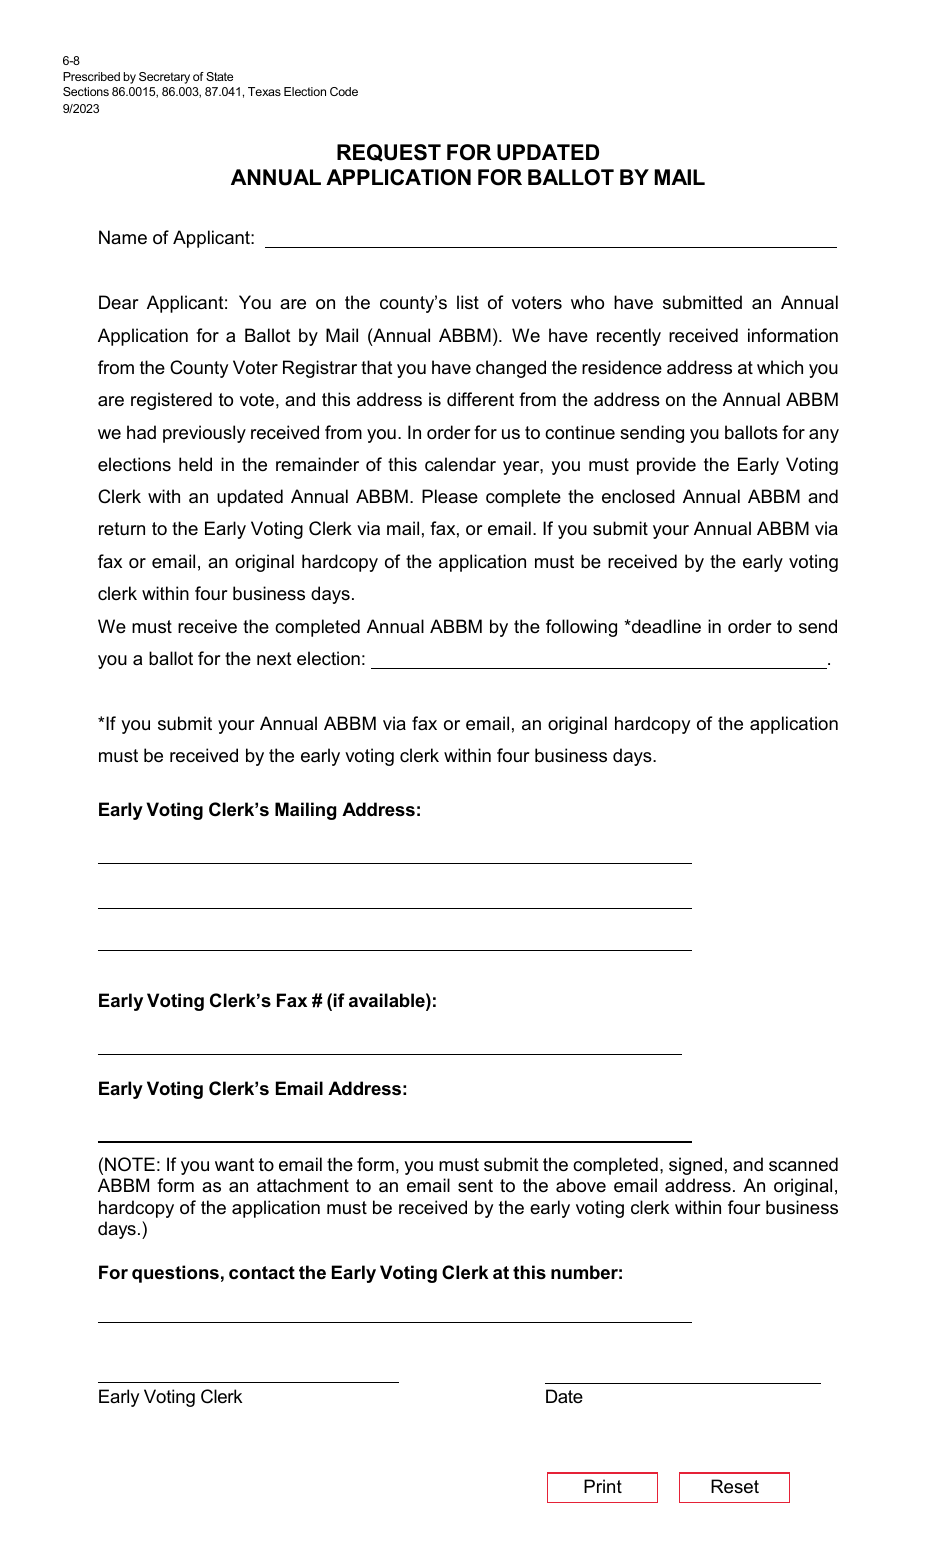 Form 6-8 Request for Updated Annual Application for Ballot by Mail - Texas (English / Spanish), Page 1